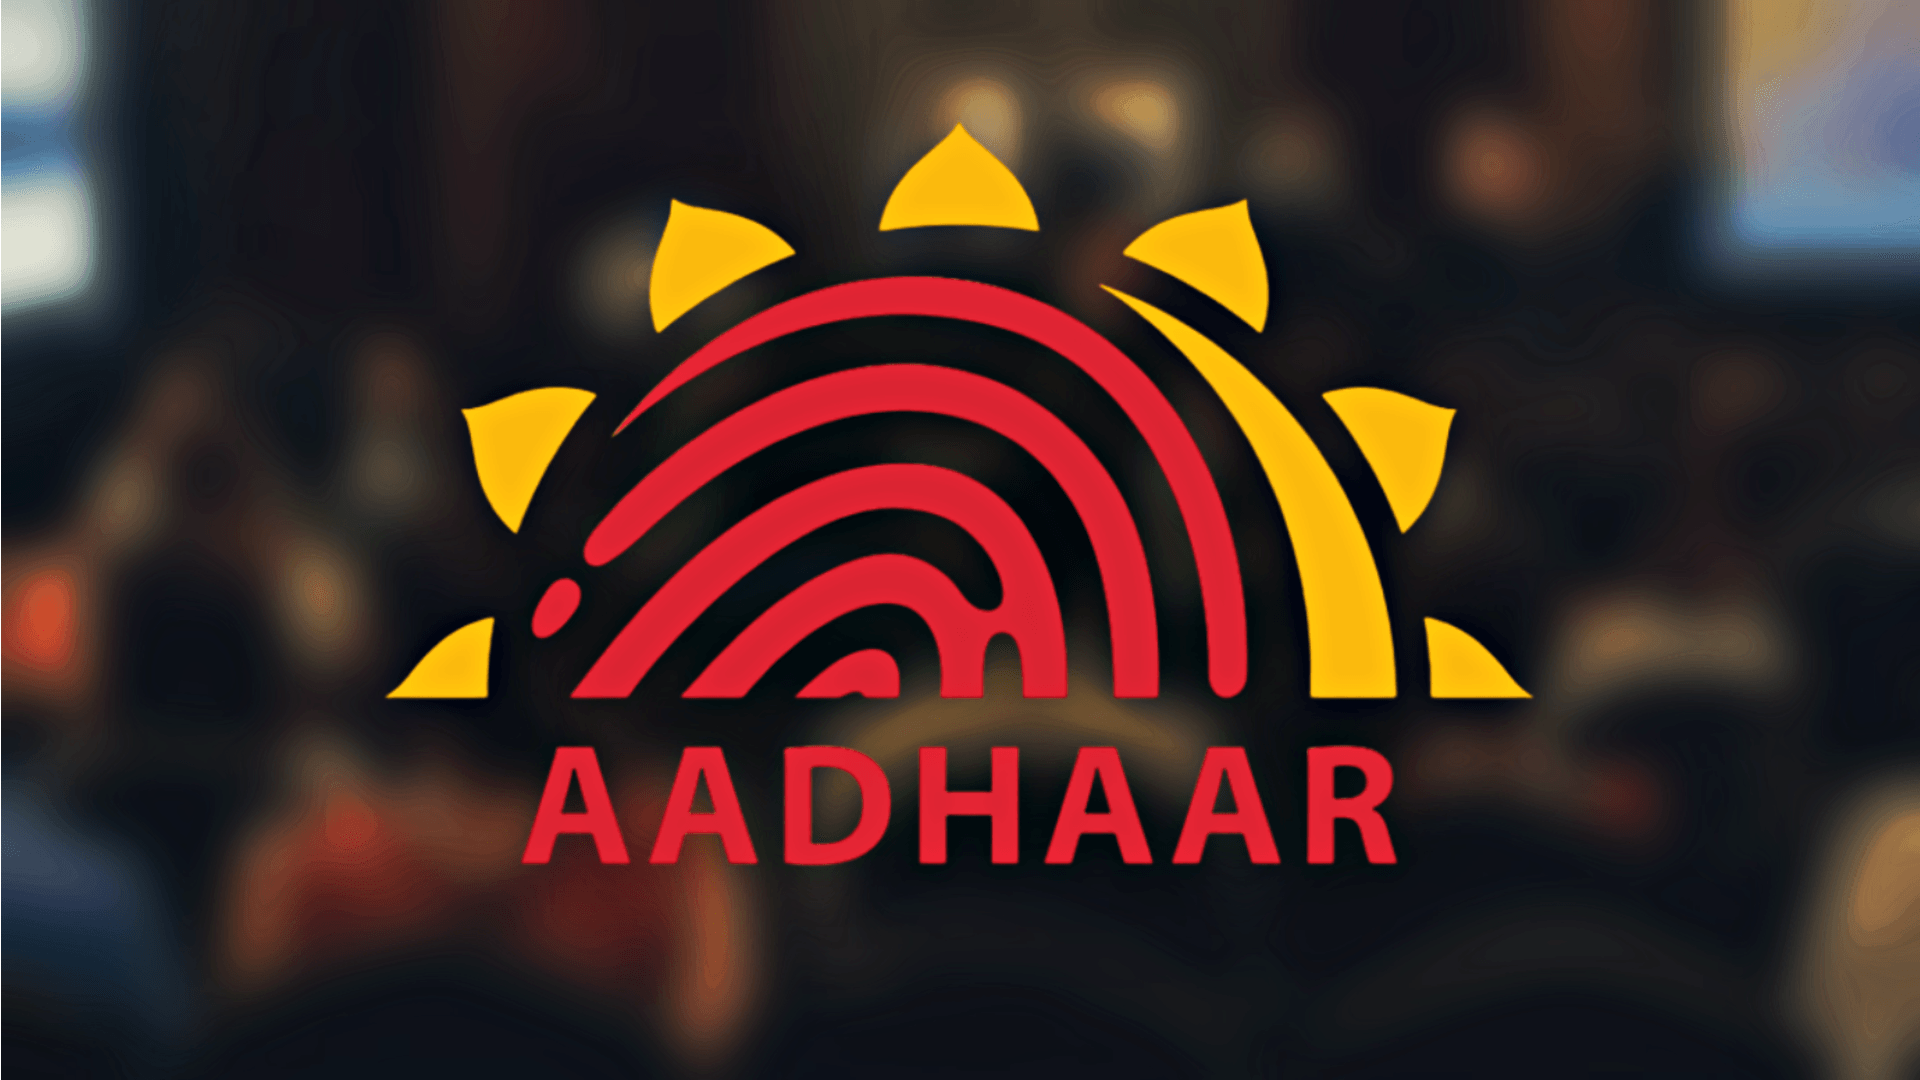 Centre proposes rules to enable Aadhaar authentication by other entities